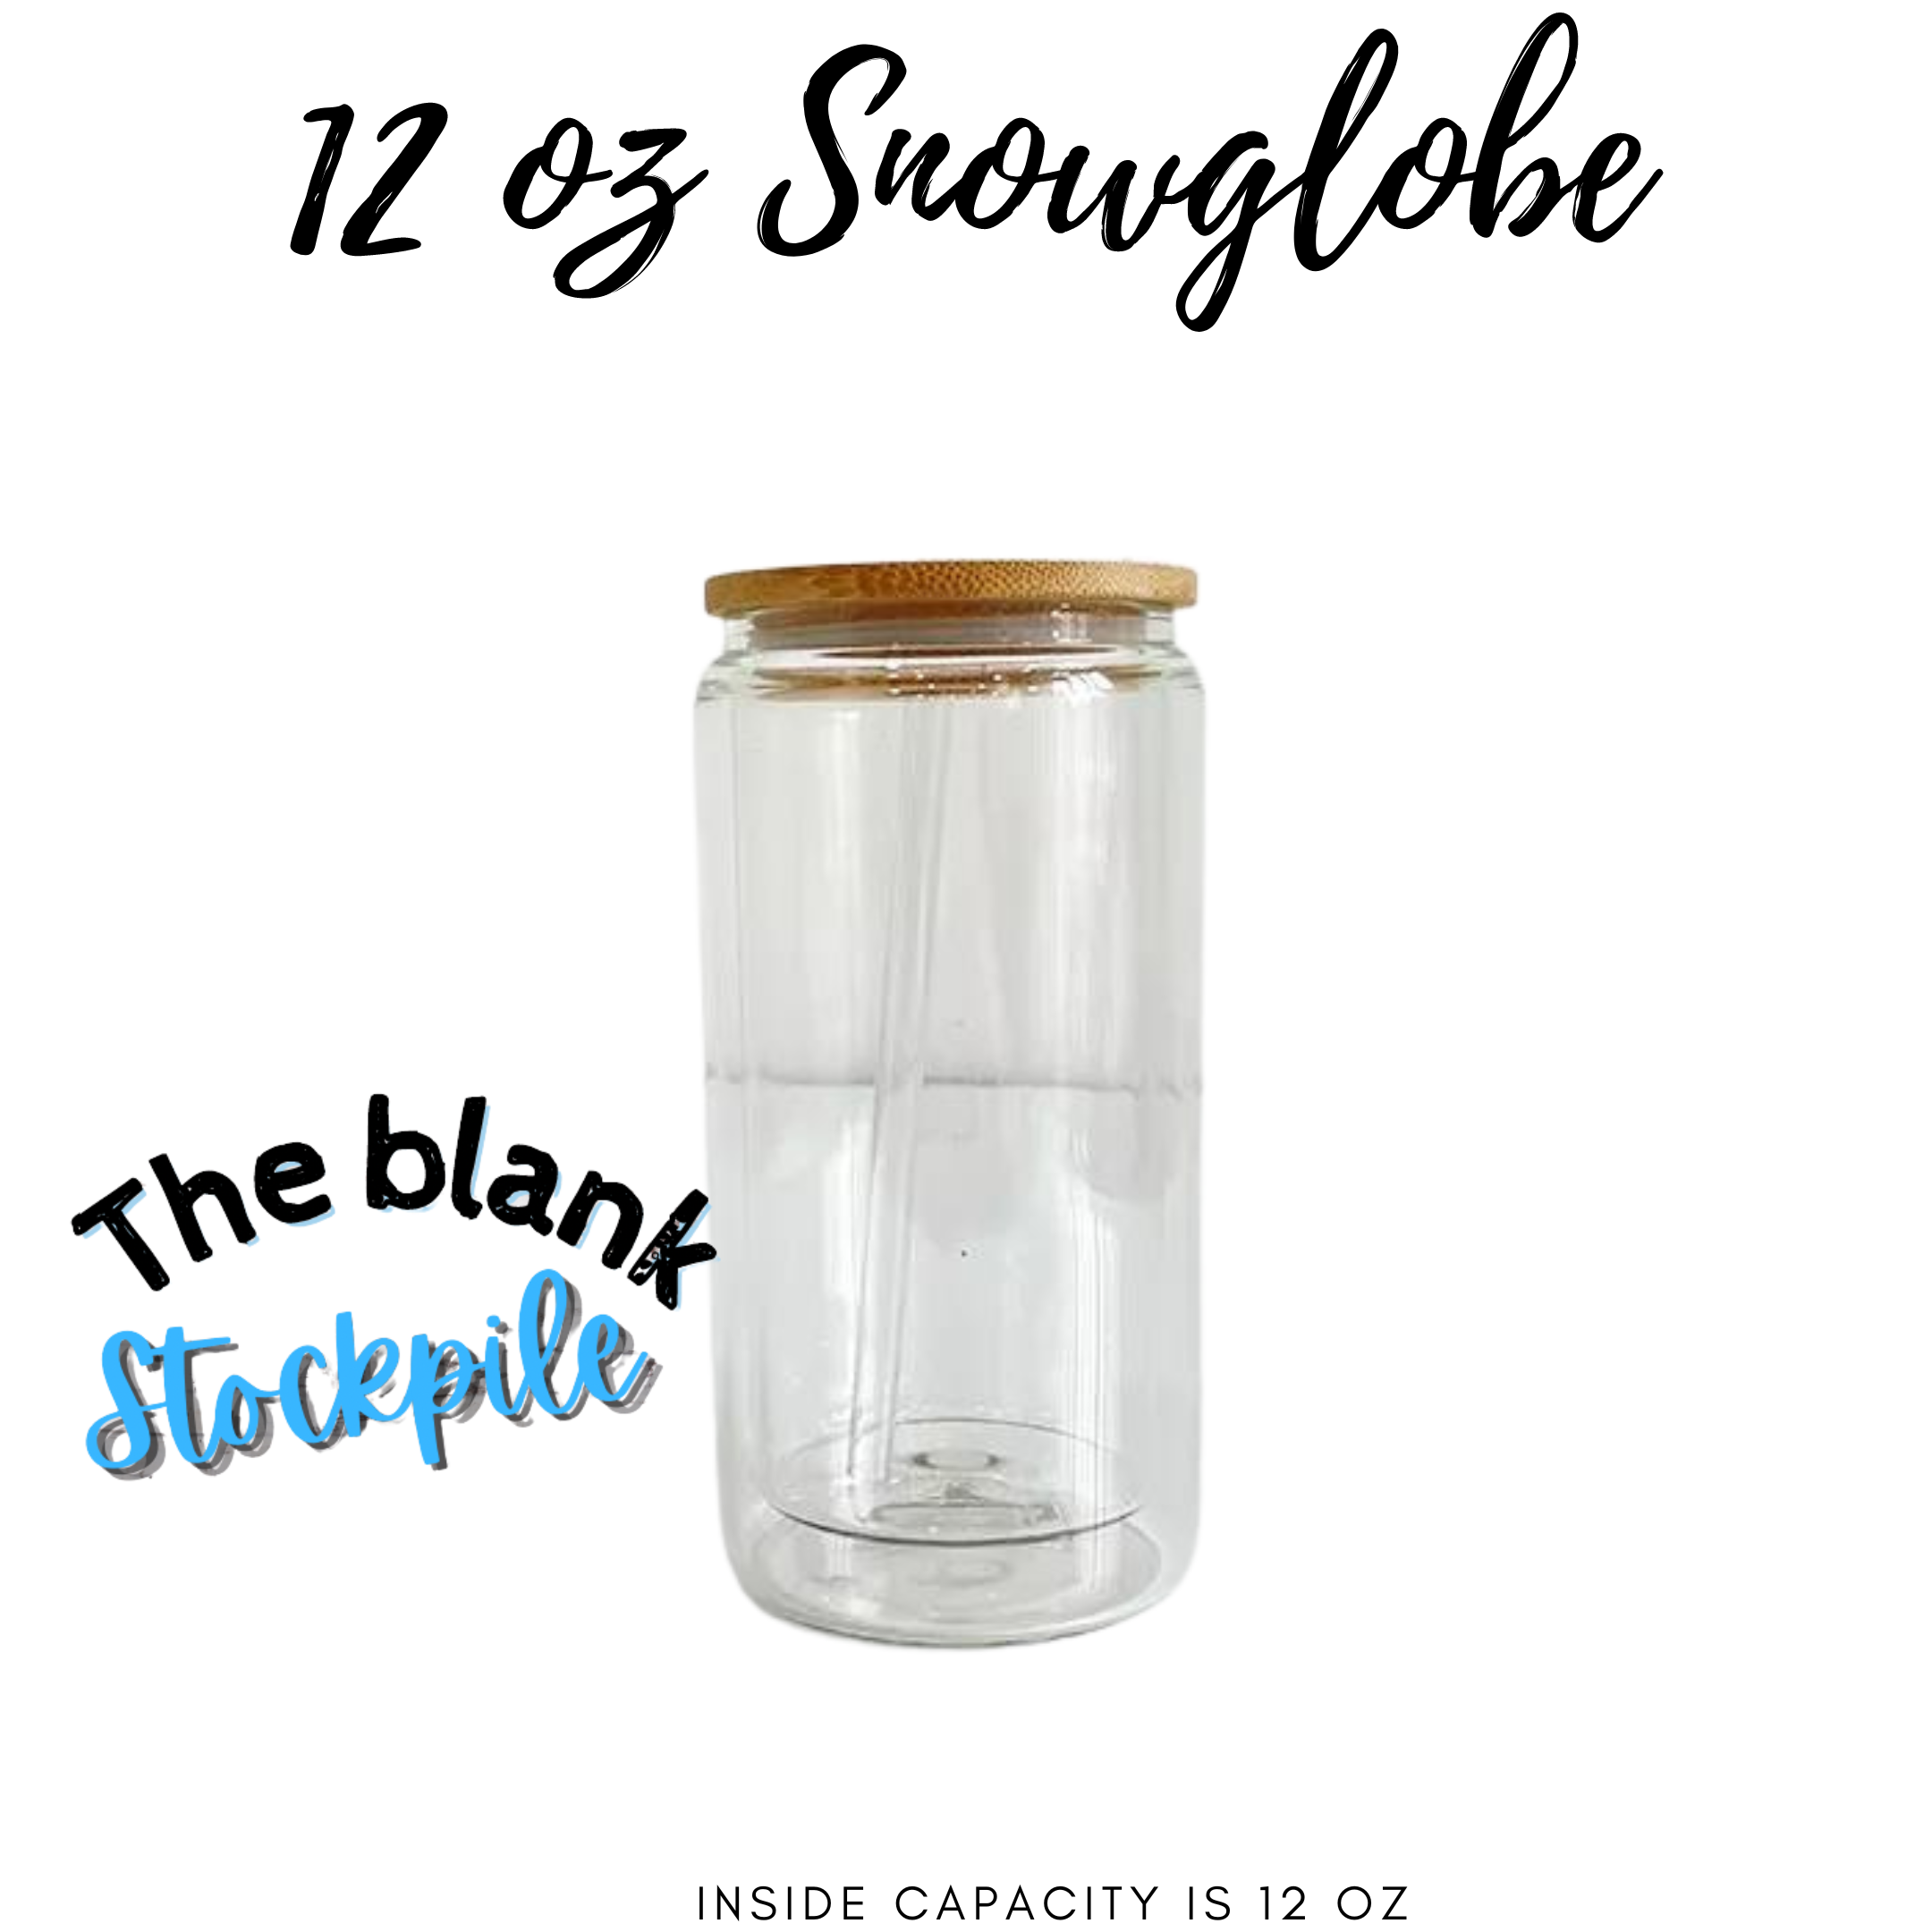 Customizable 15oz Snow Globe Glass Mug With Bamboo Lid Ideal For Coffee  Jar, Beer, And More From Hc_network, $2.87